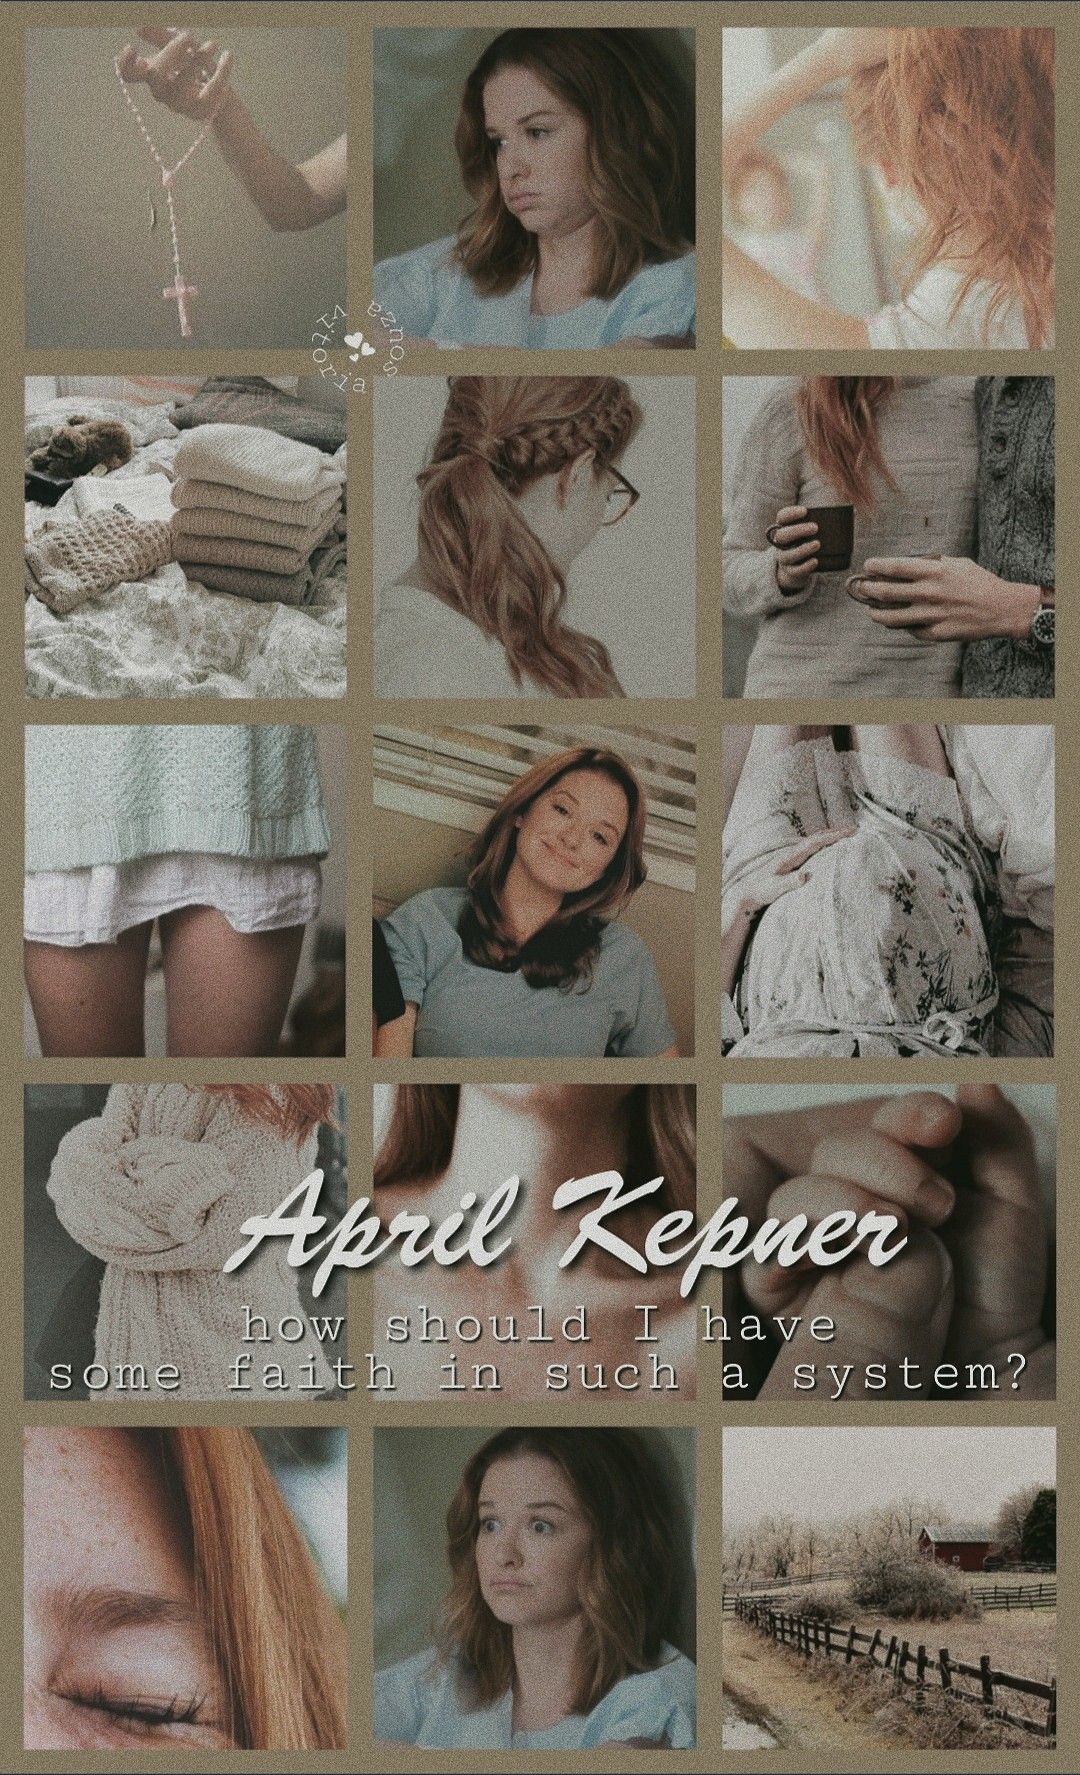 April Kepner, a character from the TV show Grey's Anatomy. - Grey's Anatomy